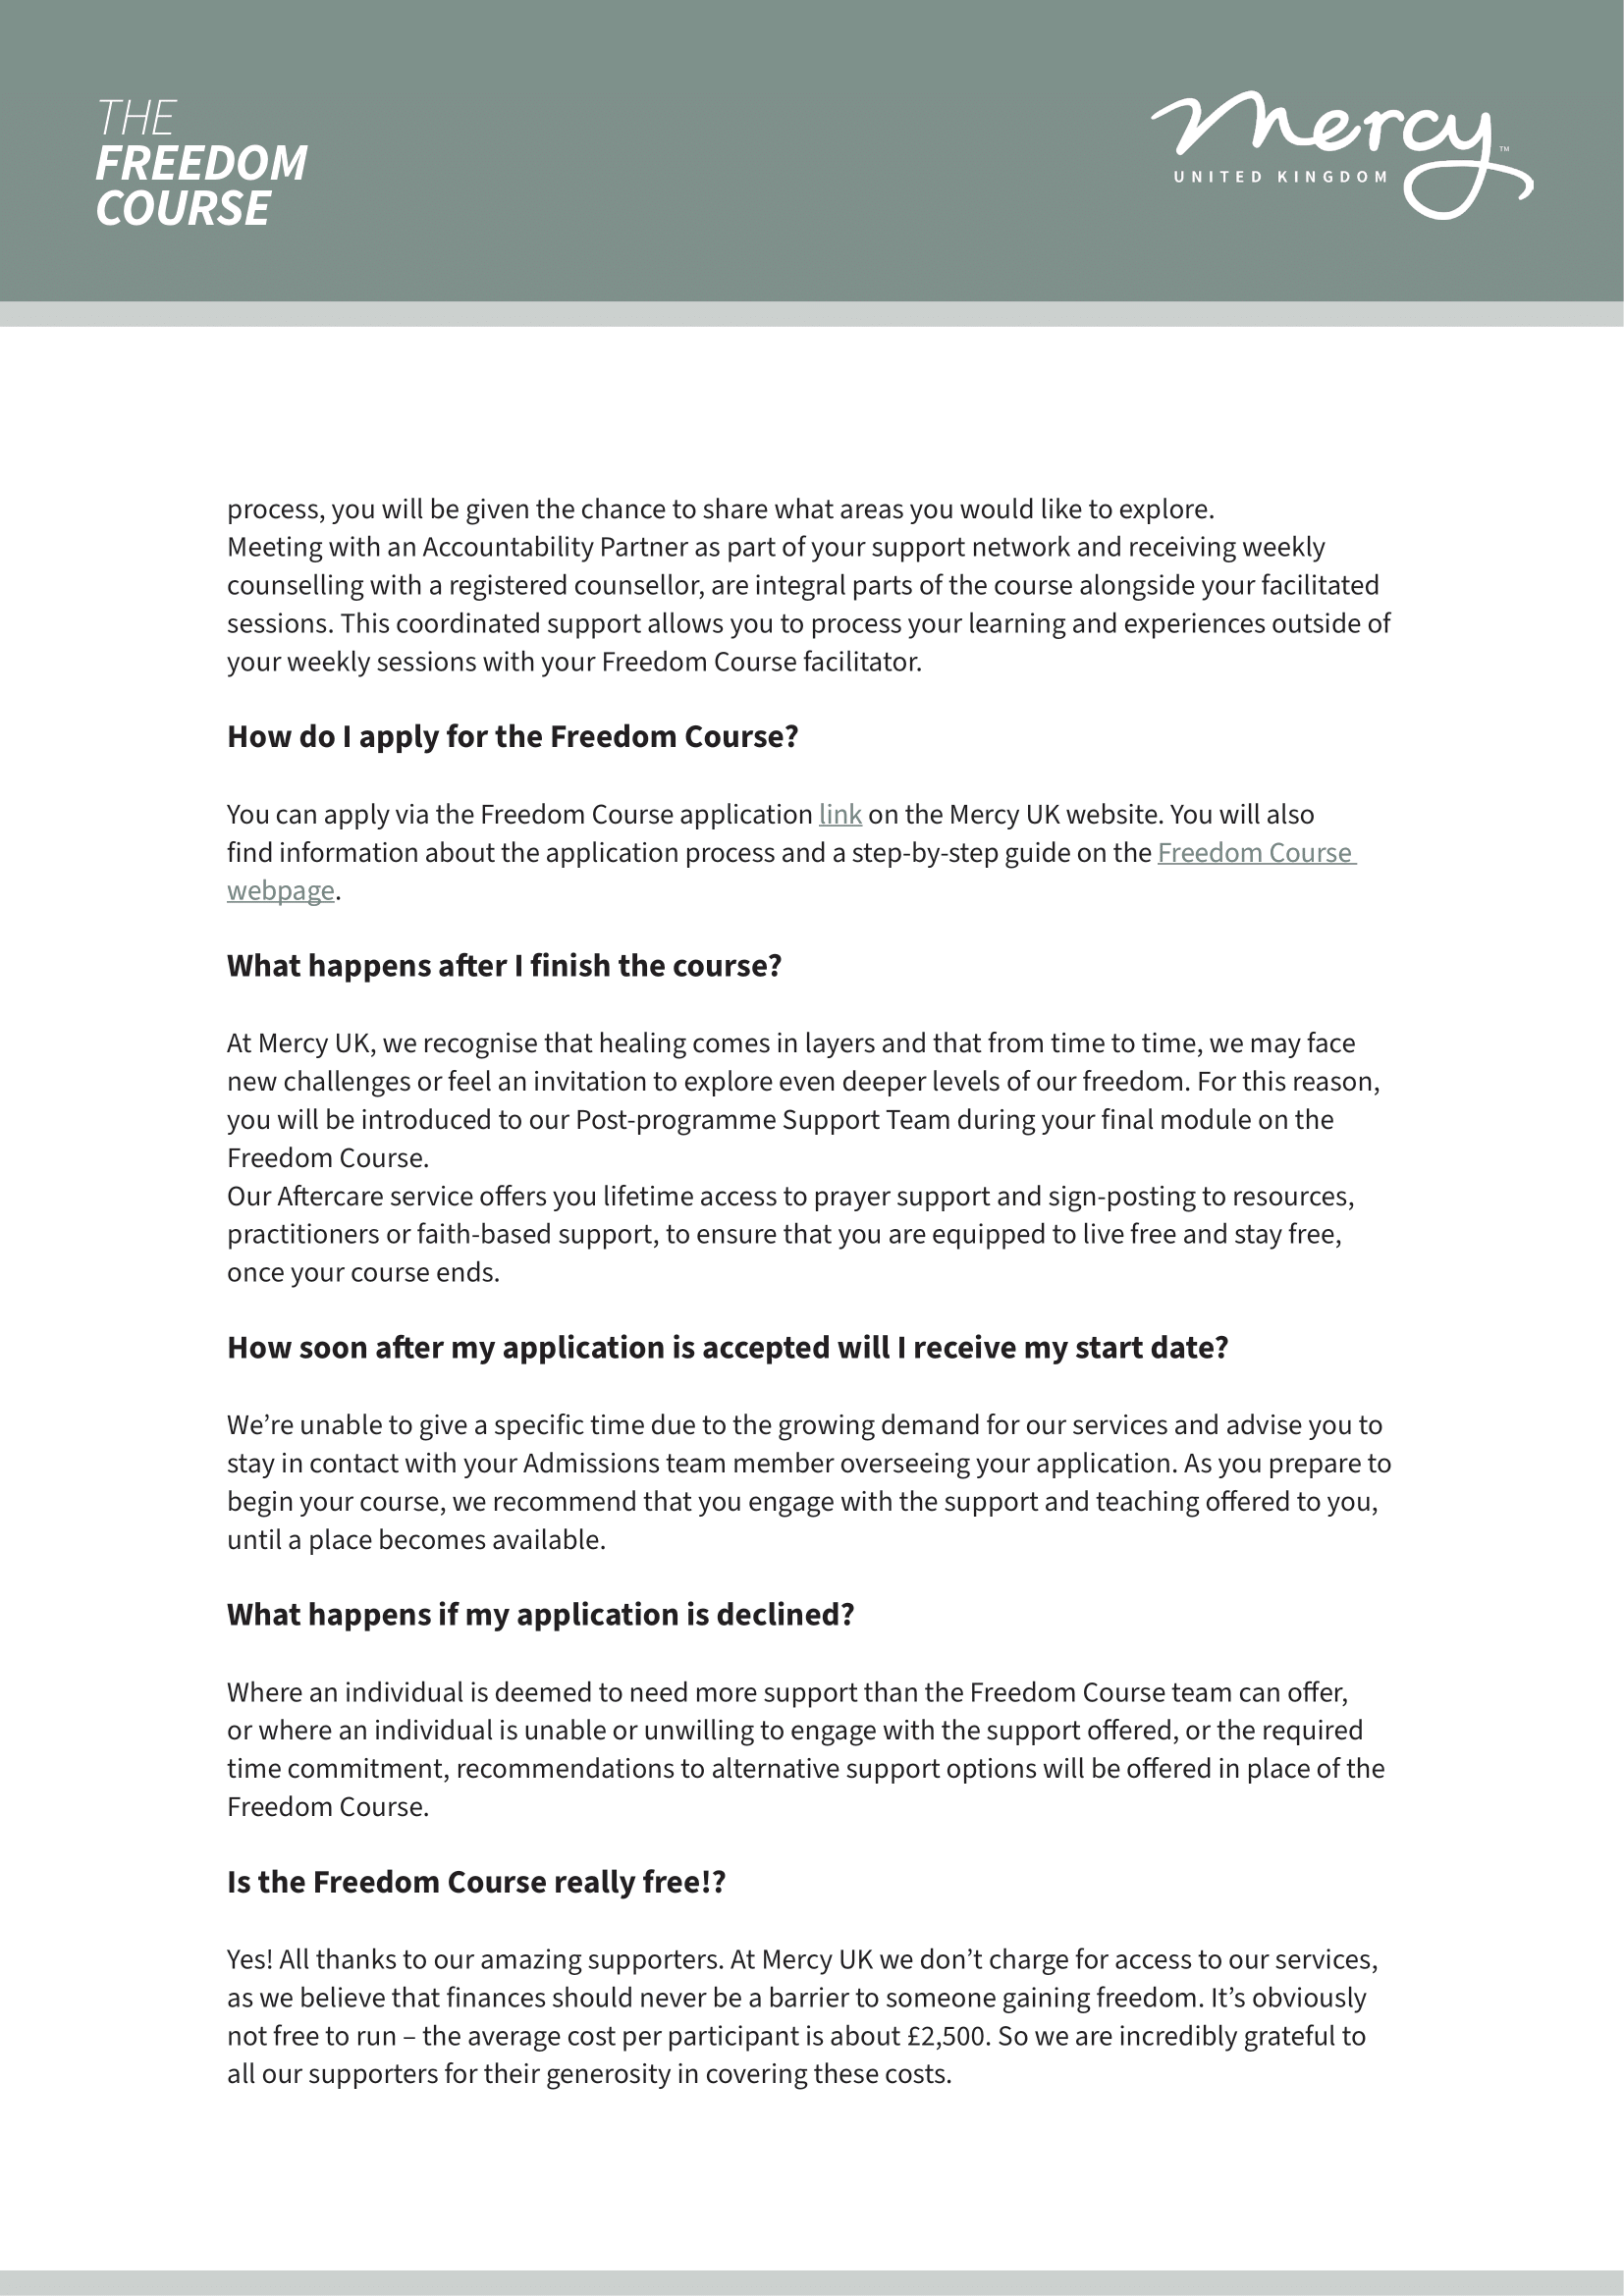 Freedom Course FAQs-3.png